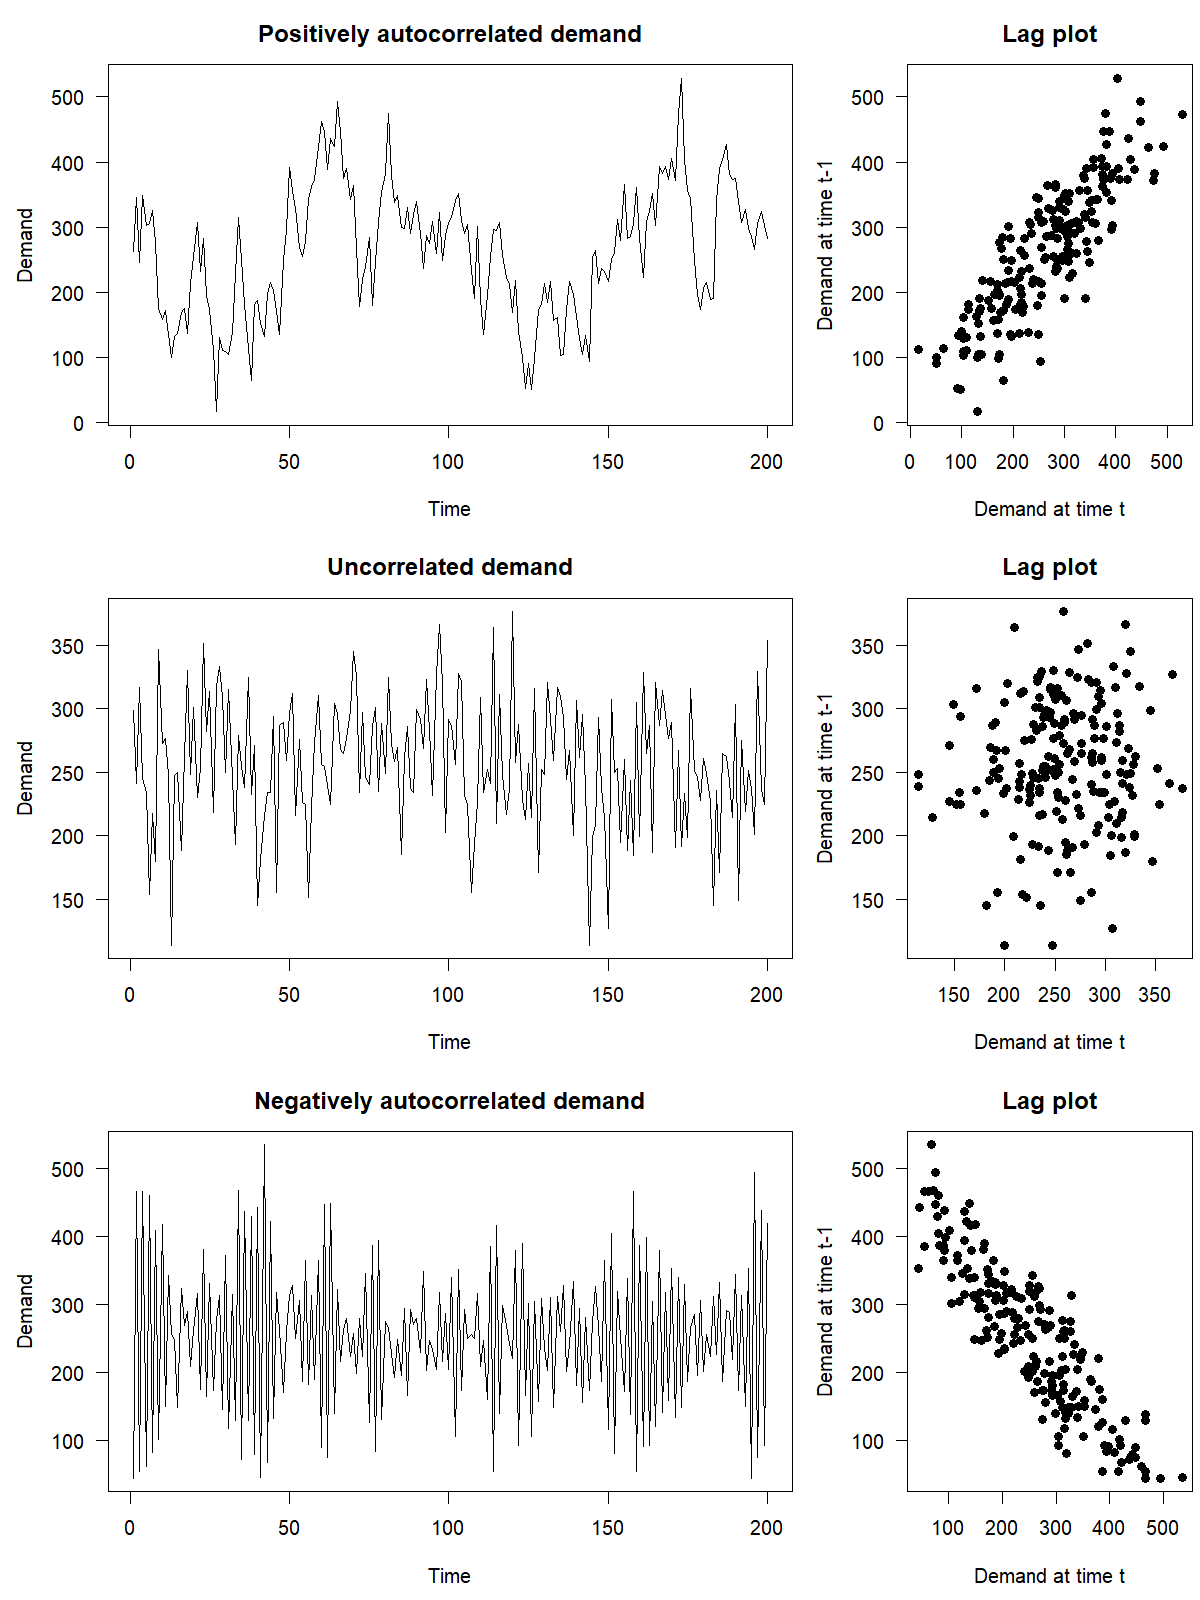 Three rows with two plots each. In each row, there is a time series plot on the left and a scatterplot of the time series data against the data lagged by one period on the right. The top row shows simulated data with a positive autocorrelation, thus the scatterplot shows a point cloud with an increasing trend. The middle row shows simulated data with no autocorrelation, thus the scatterplot shows a point cloud without structure. The bottom row shows simulated data with a negative autocorrelation, thus the scatterplot shows a point cloud with a decreasing trend.